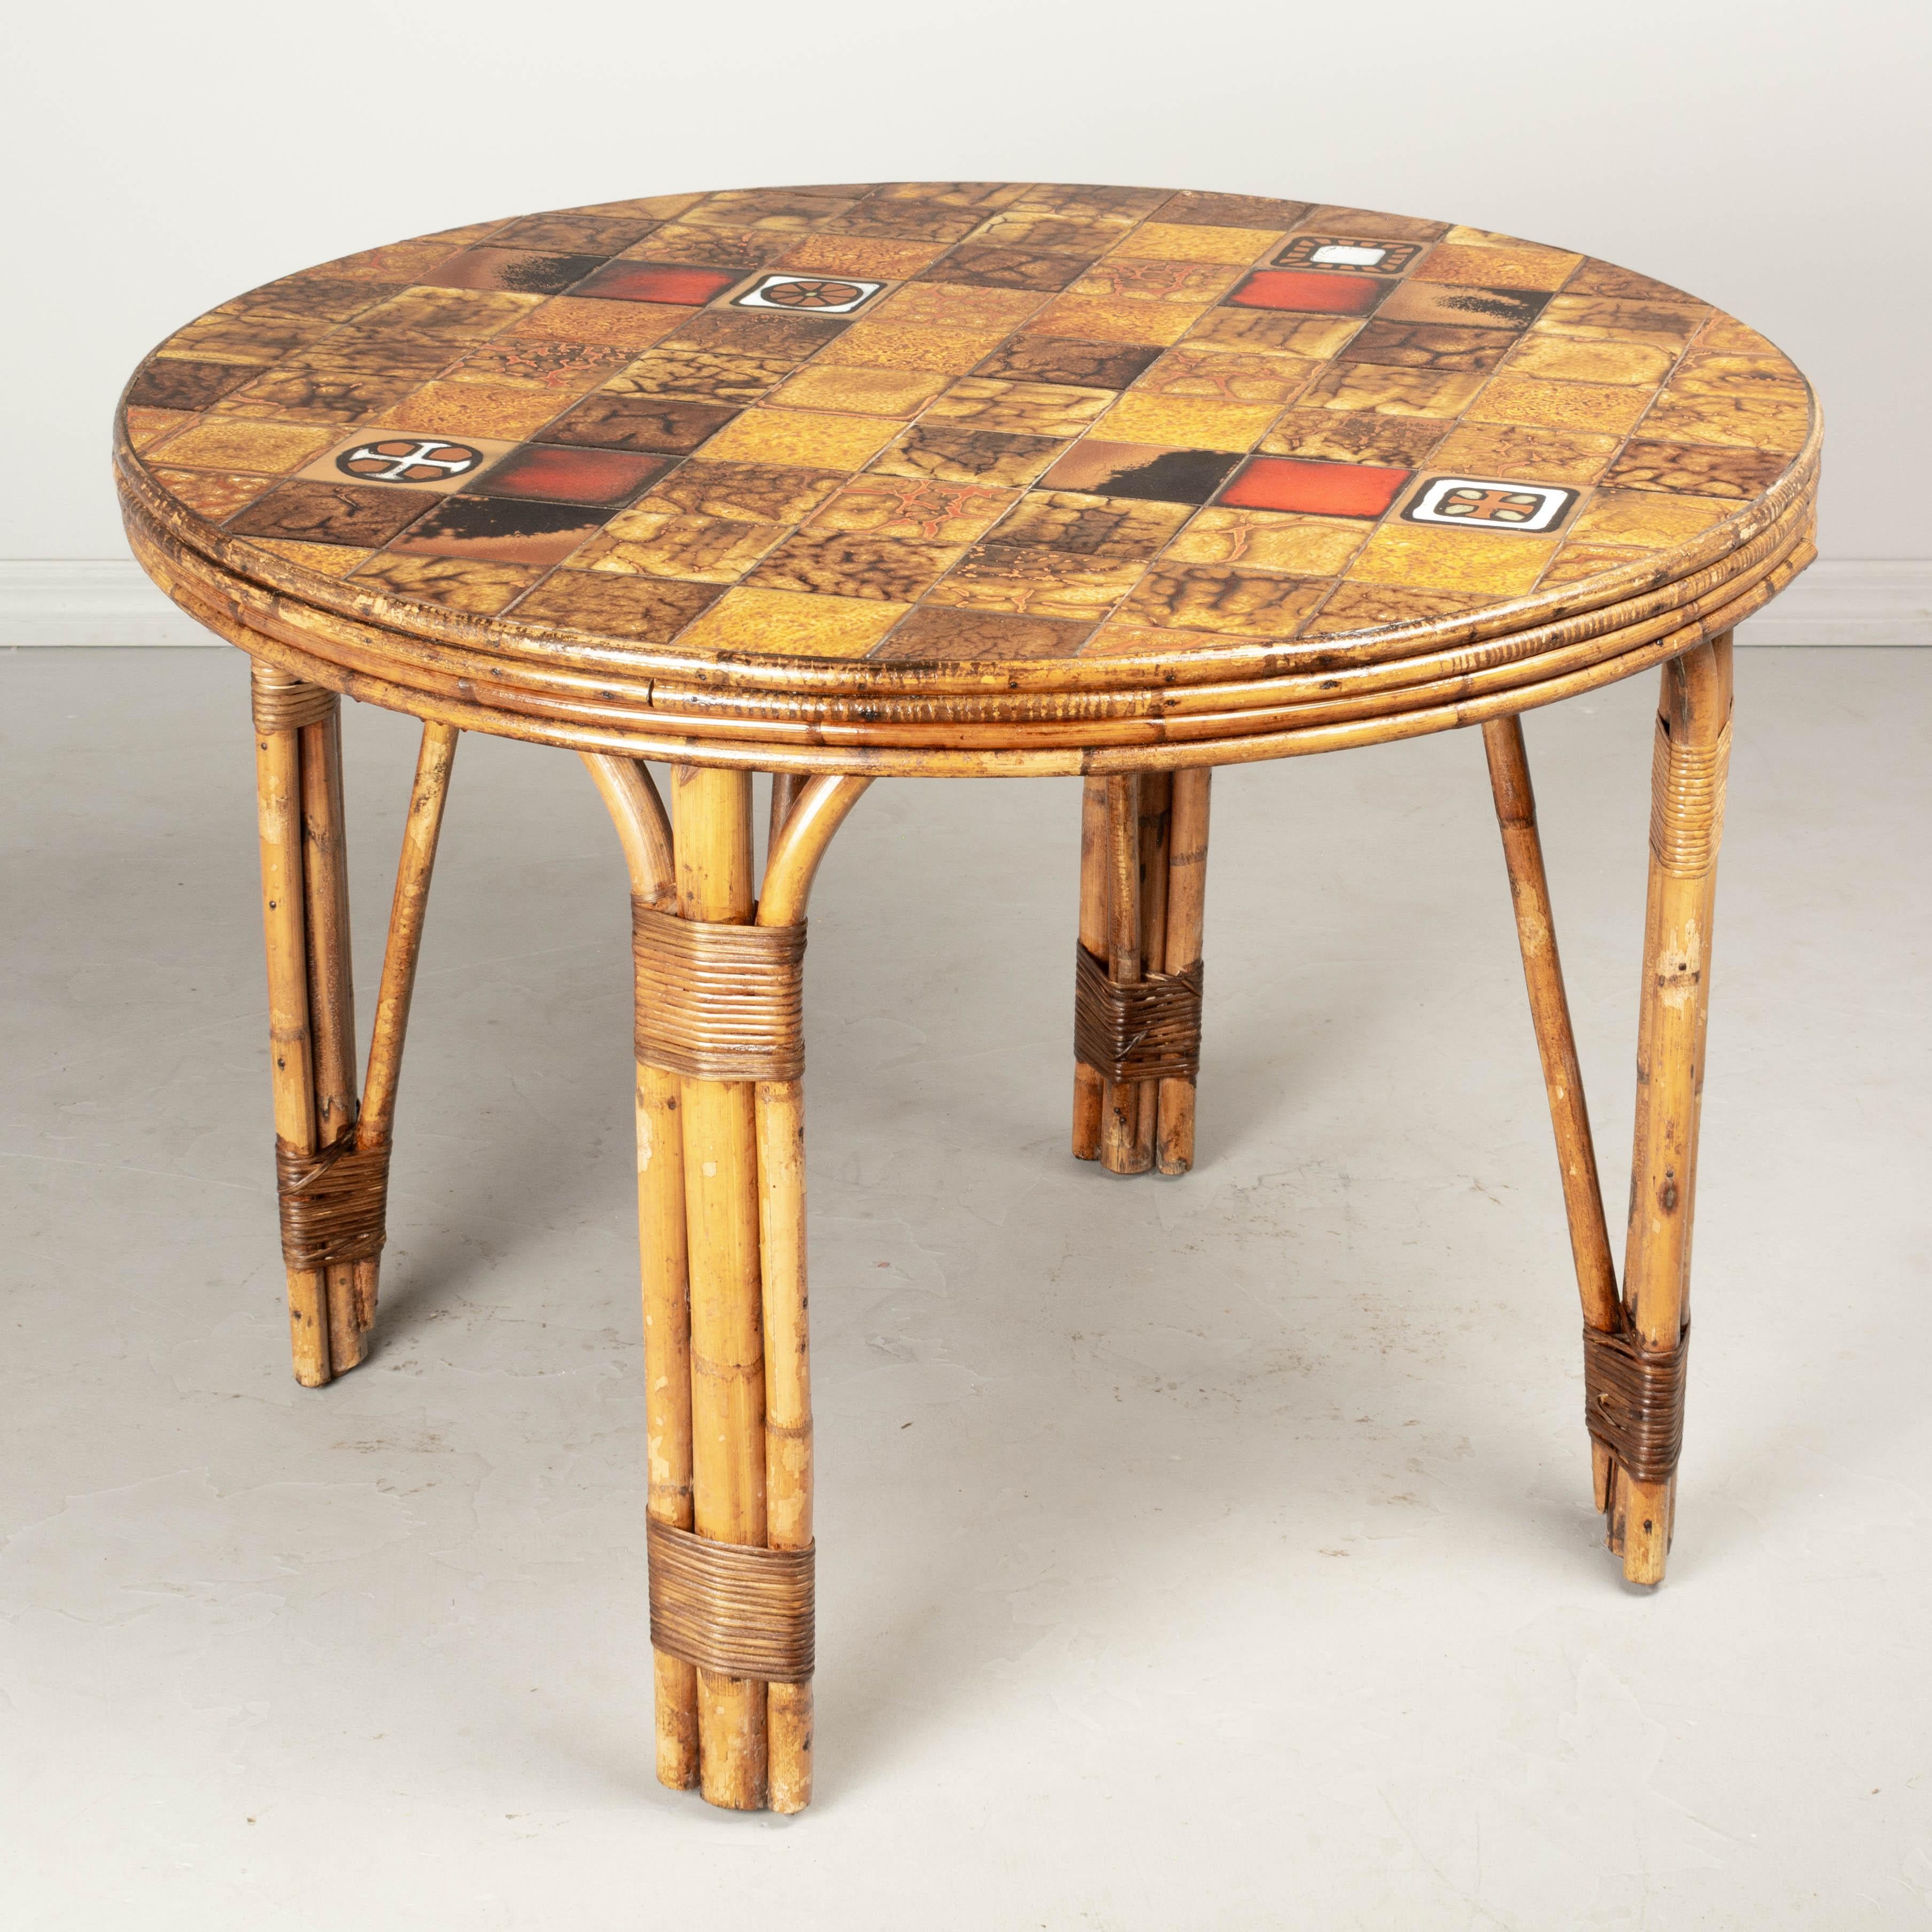 wood dining table with tile top